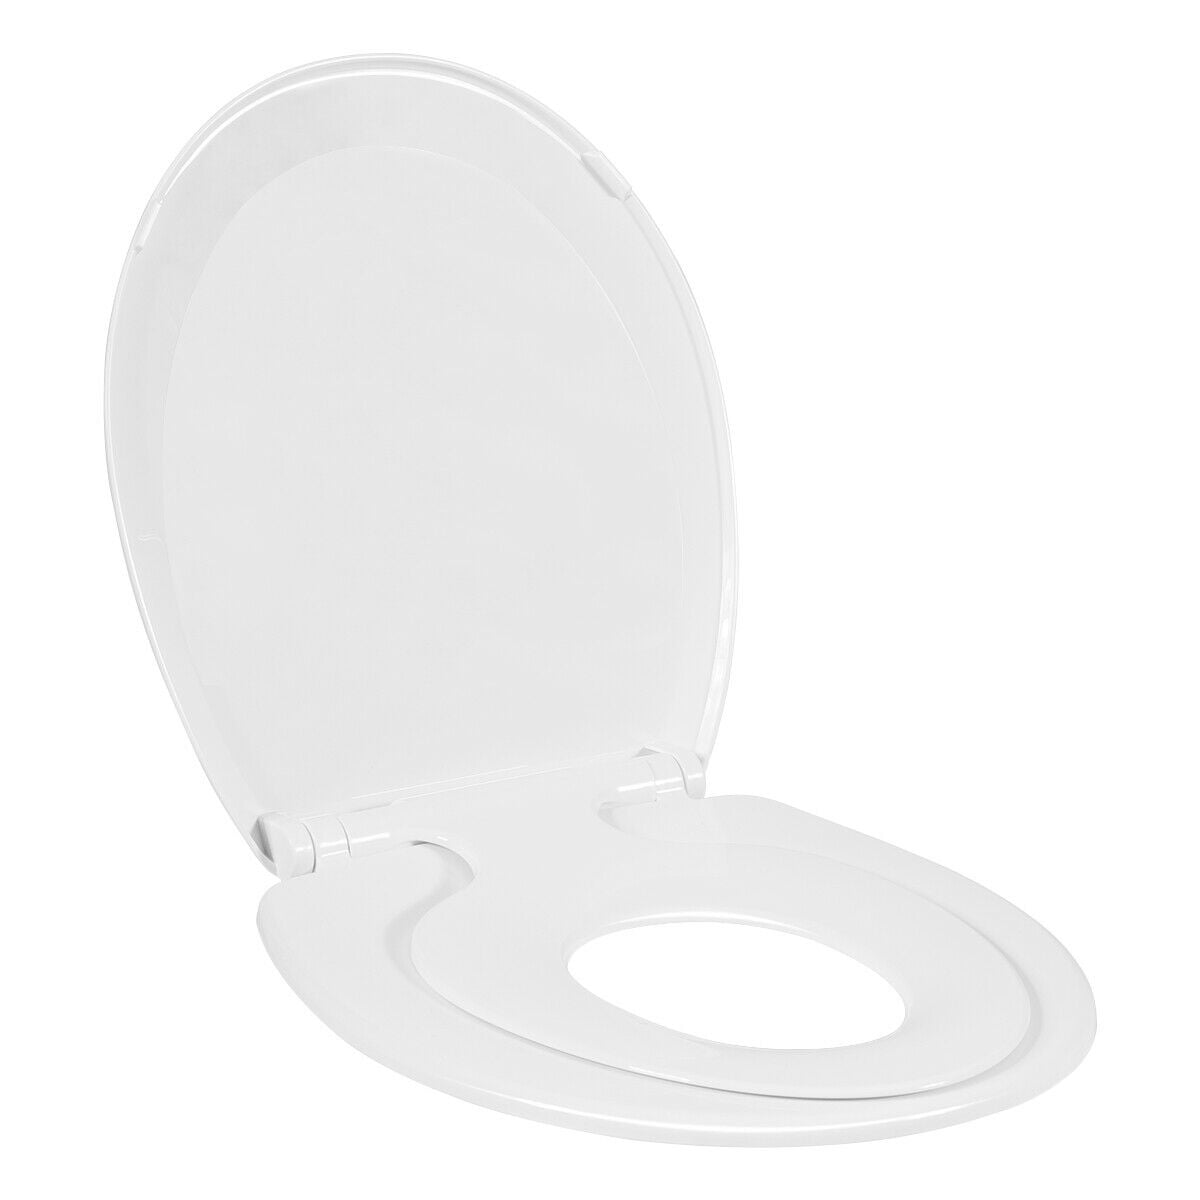 White Toilet Seat with Built-In Potty Training Seat Fits both Adult and Child Oval Soft Close,Never Loosen， Removable Easy to Instal &Clean,Durable Plastic 